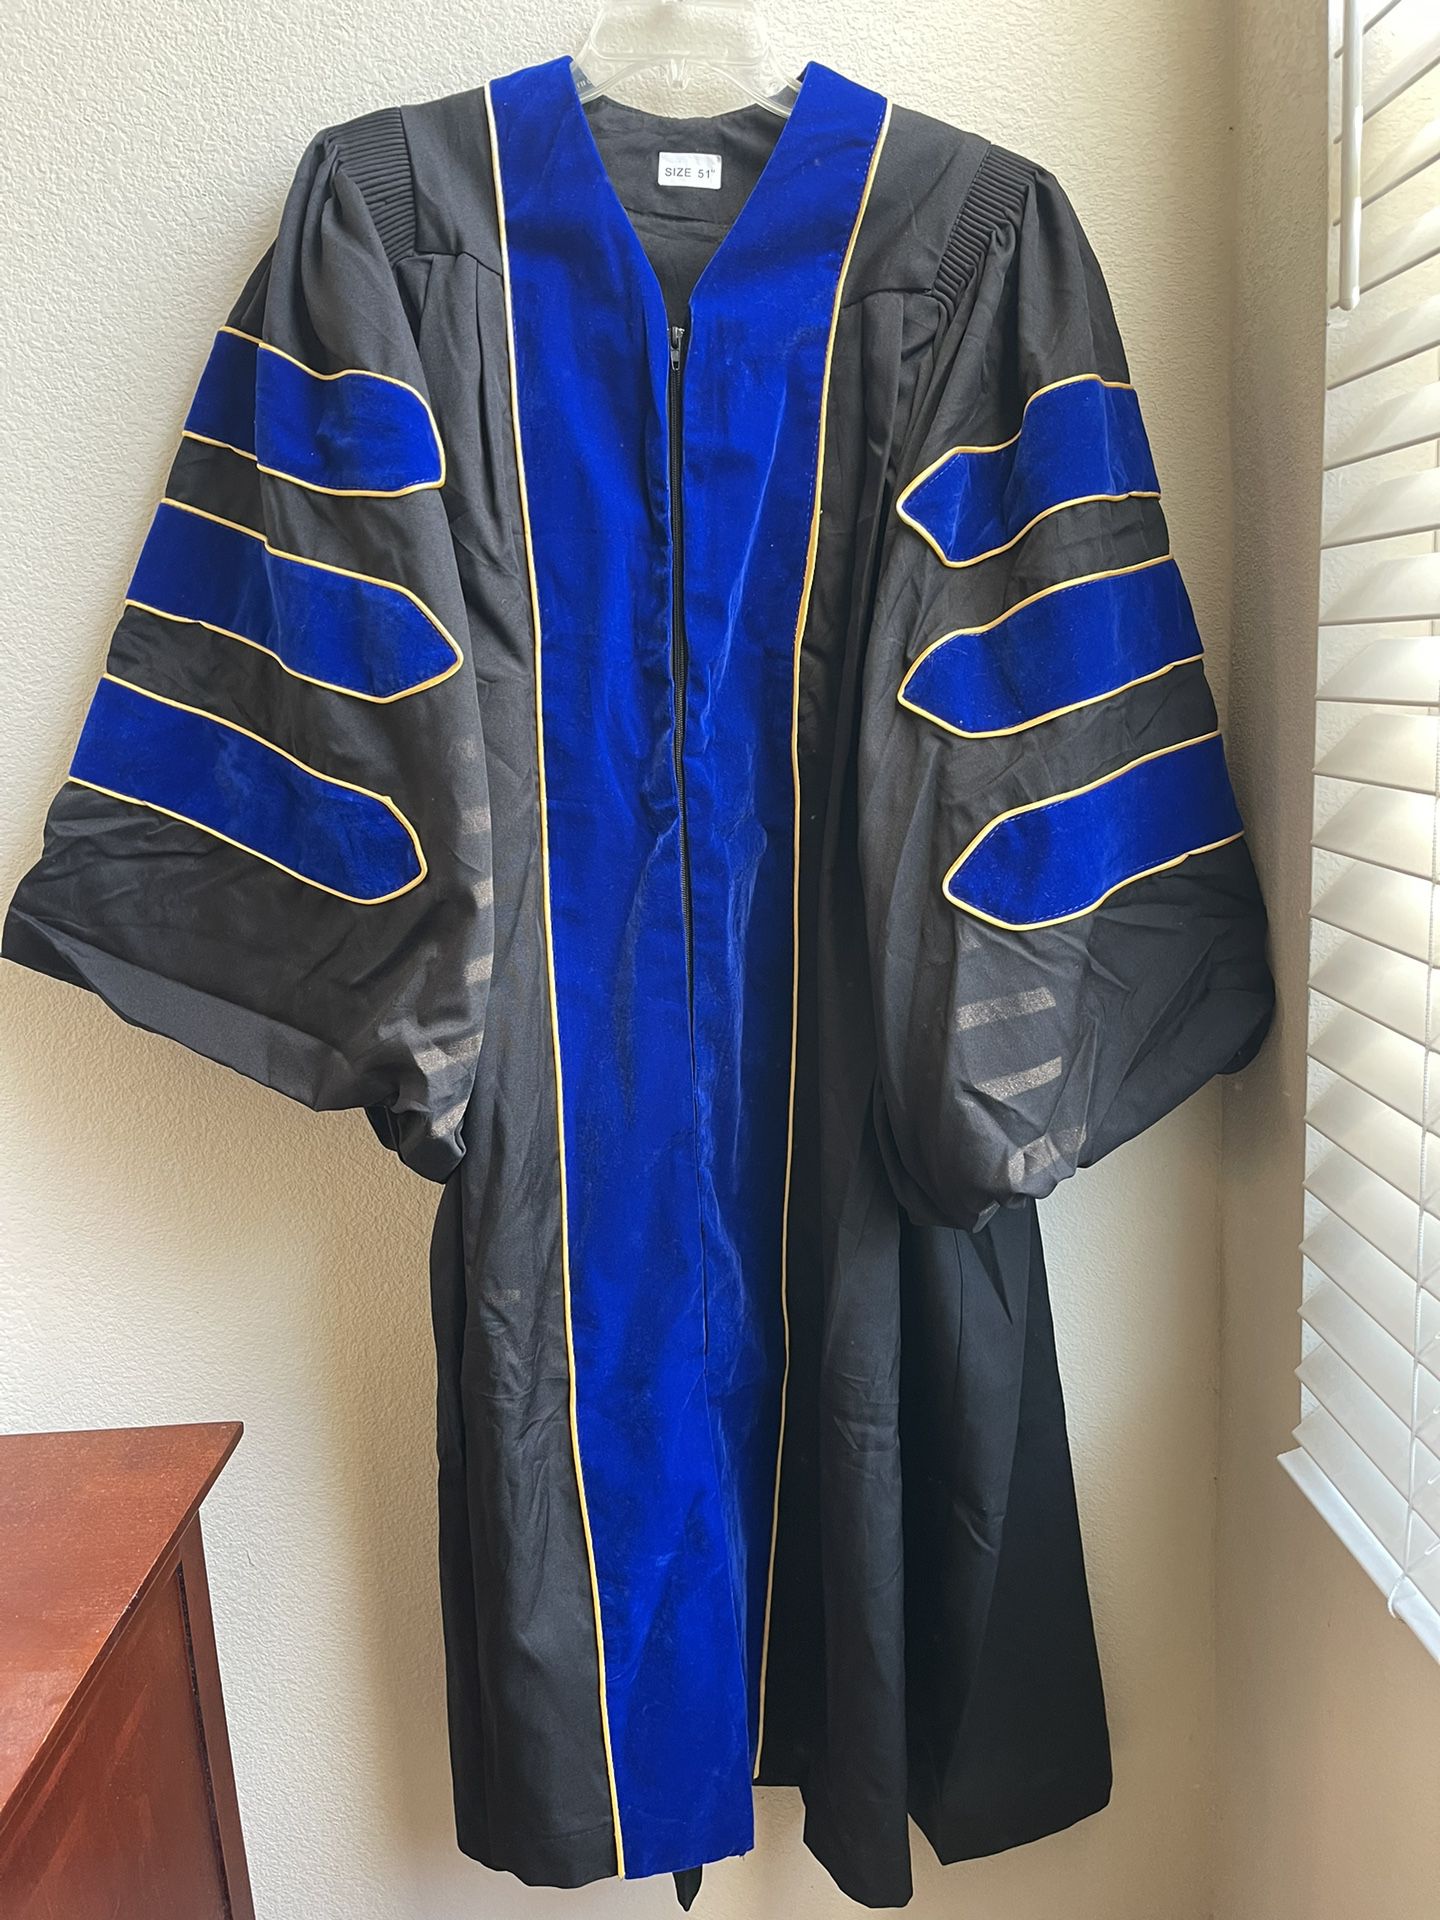 New Doctoral Robe With Gold Piping 85.